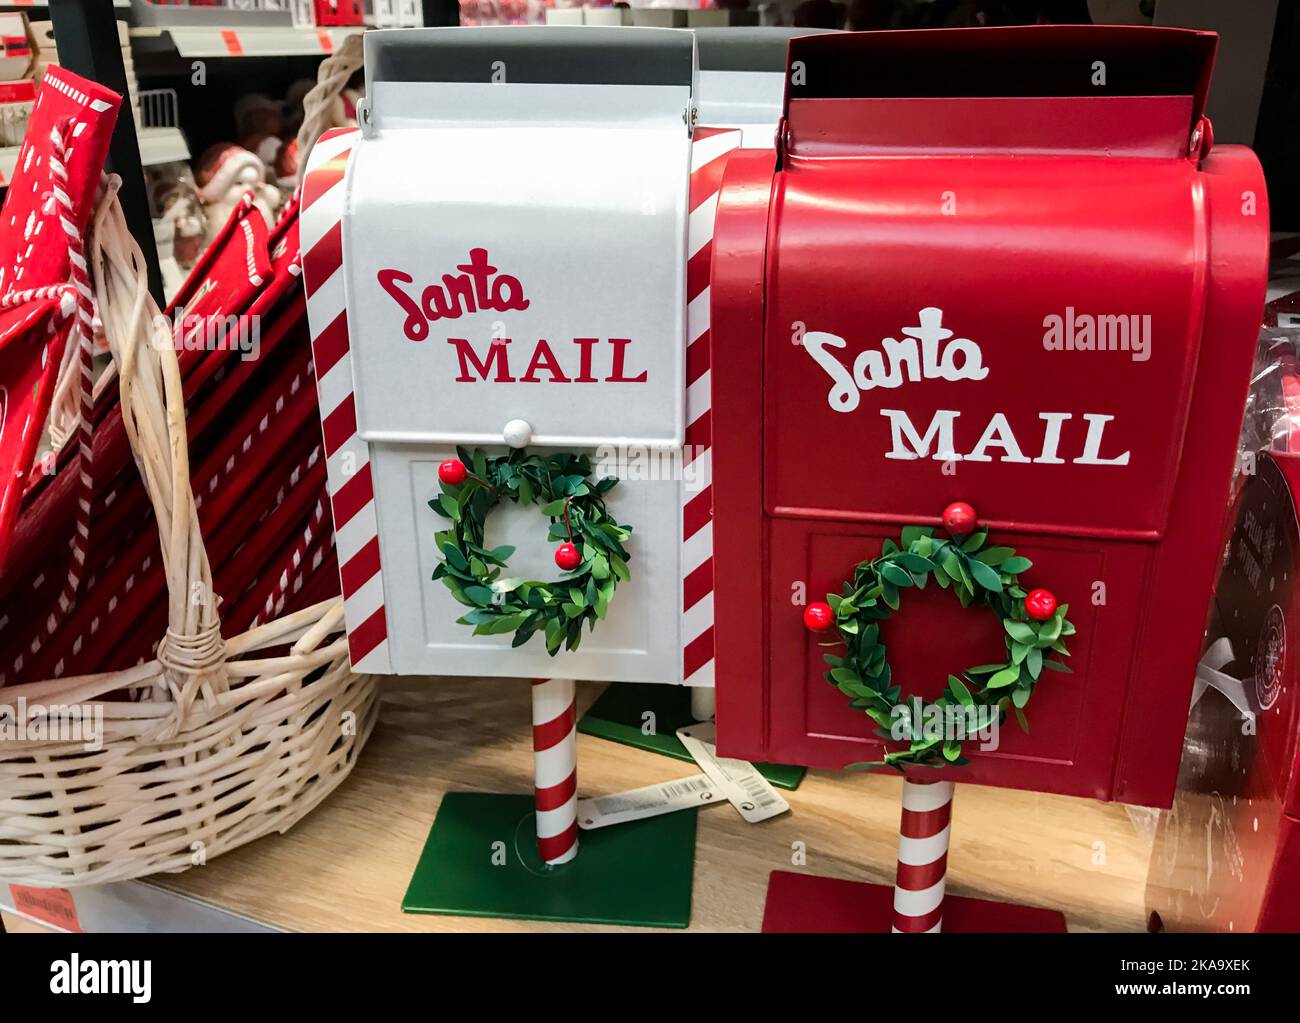 Santa Mail. Red and white mailboxes with green wreaths for letters to Santa Claus. Christmas decorations. Stock Photo